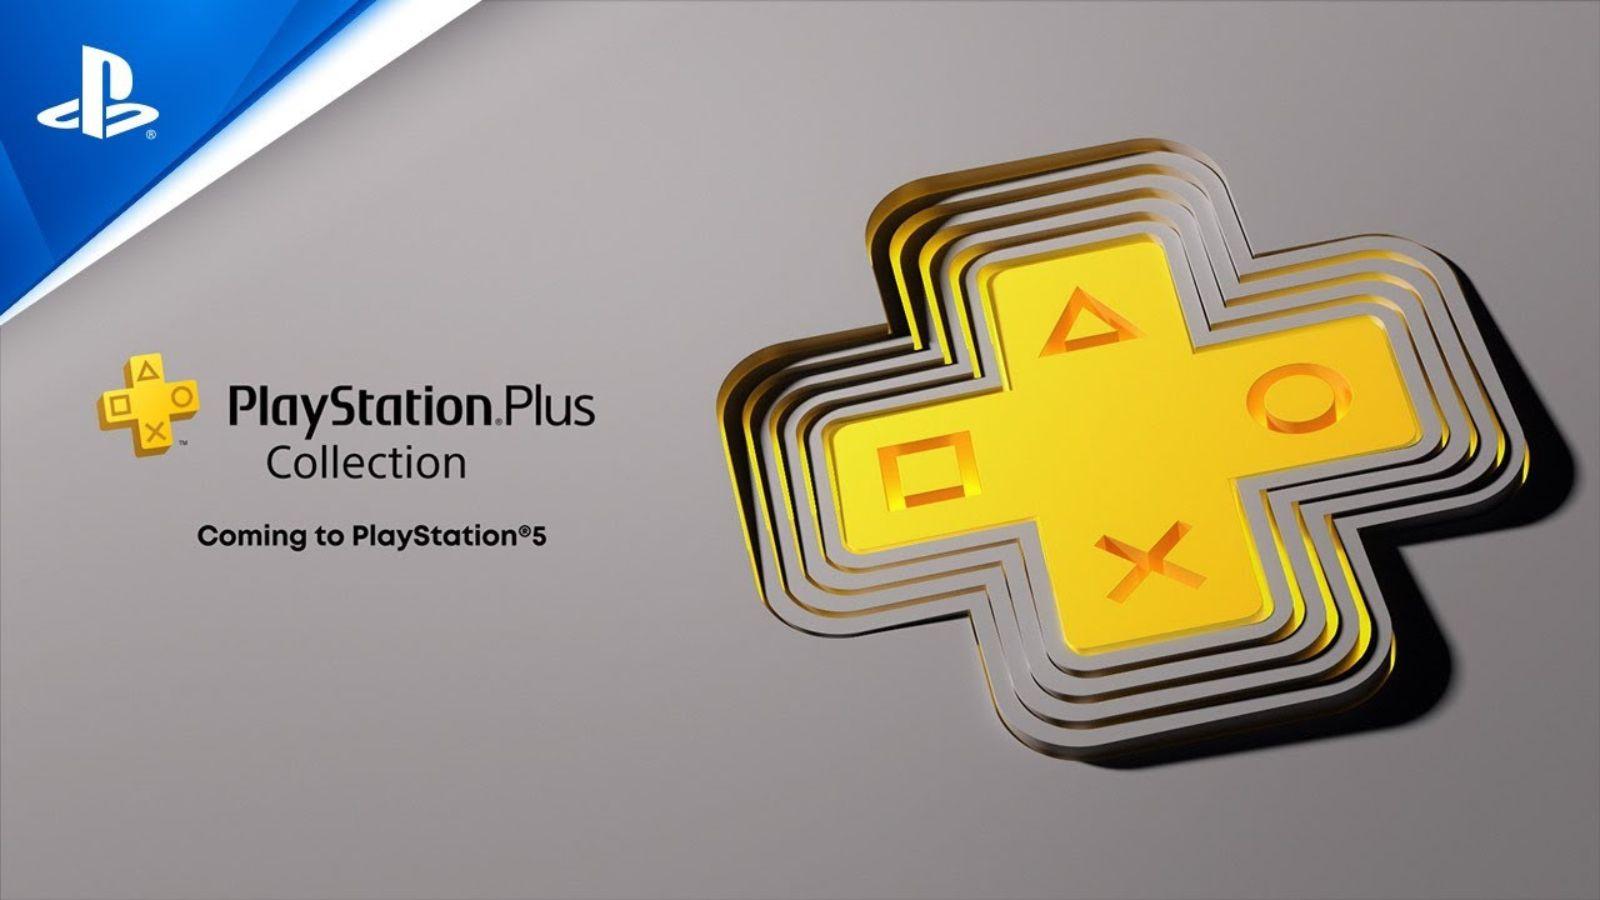 Random but who else is happy that roblox is coming to Playstation